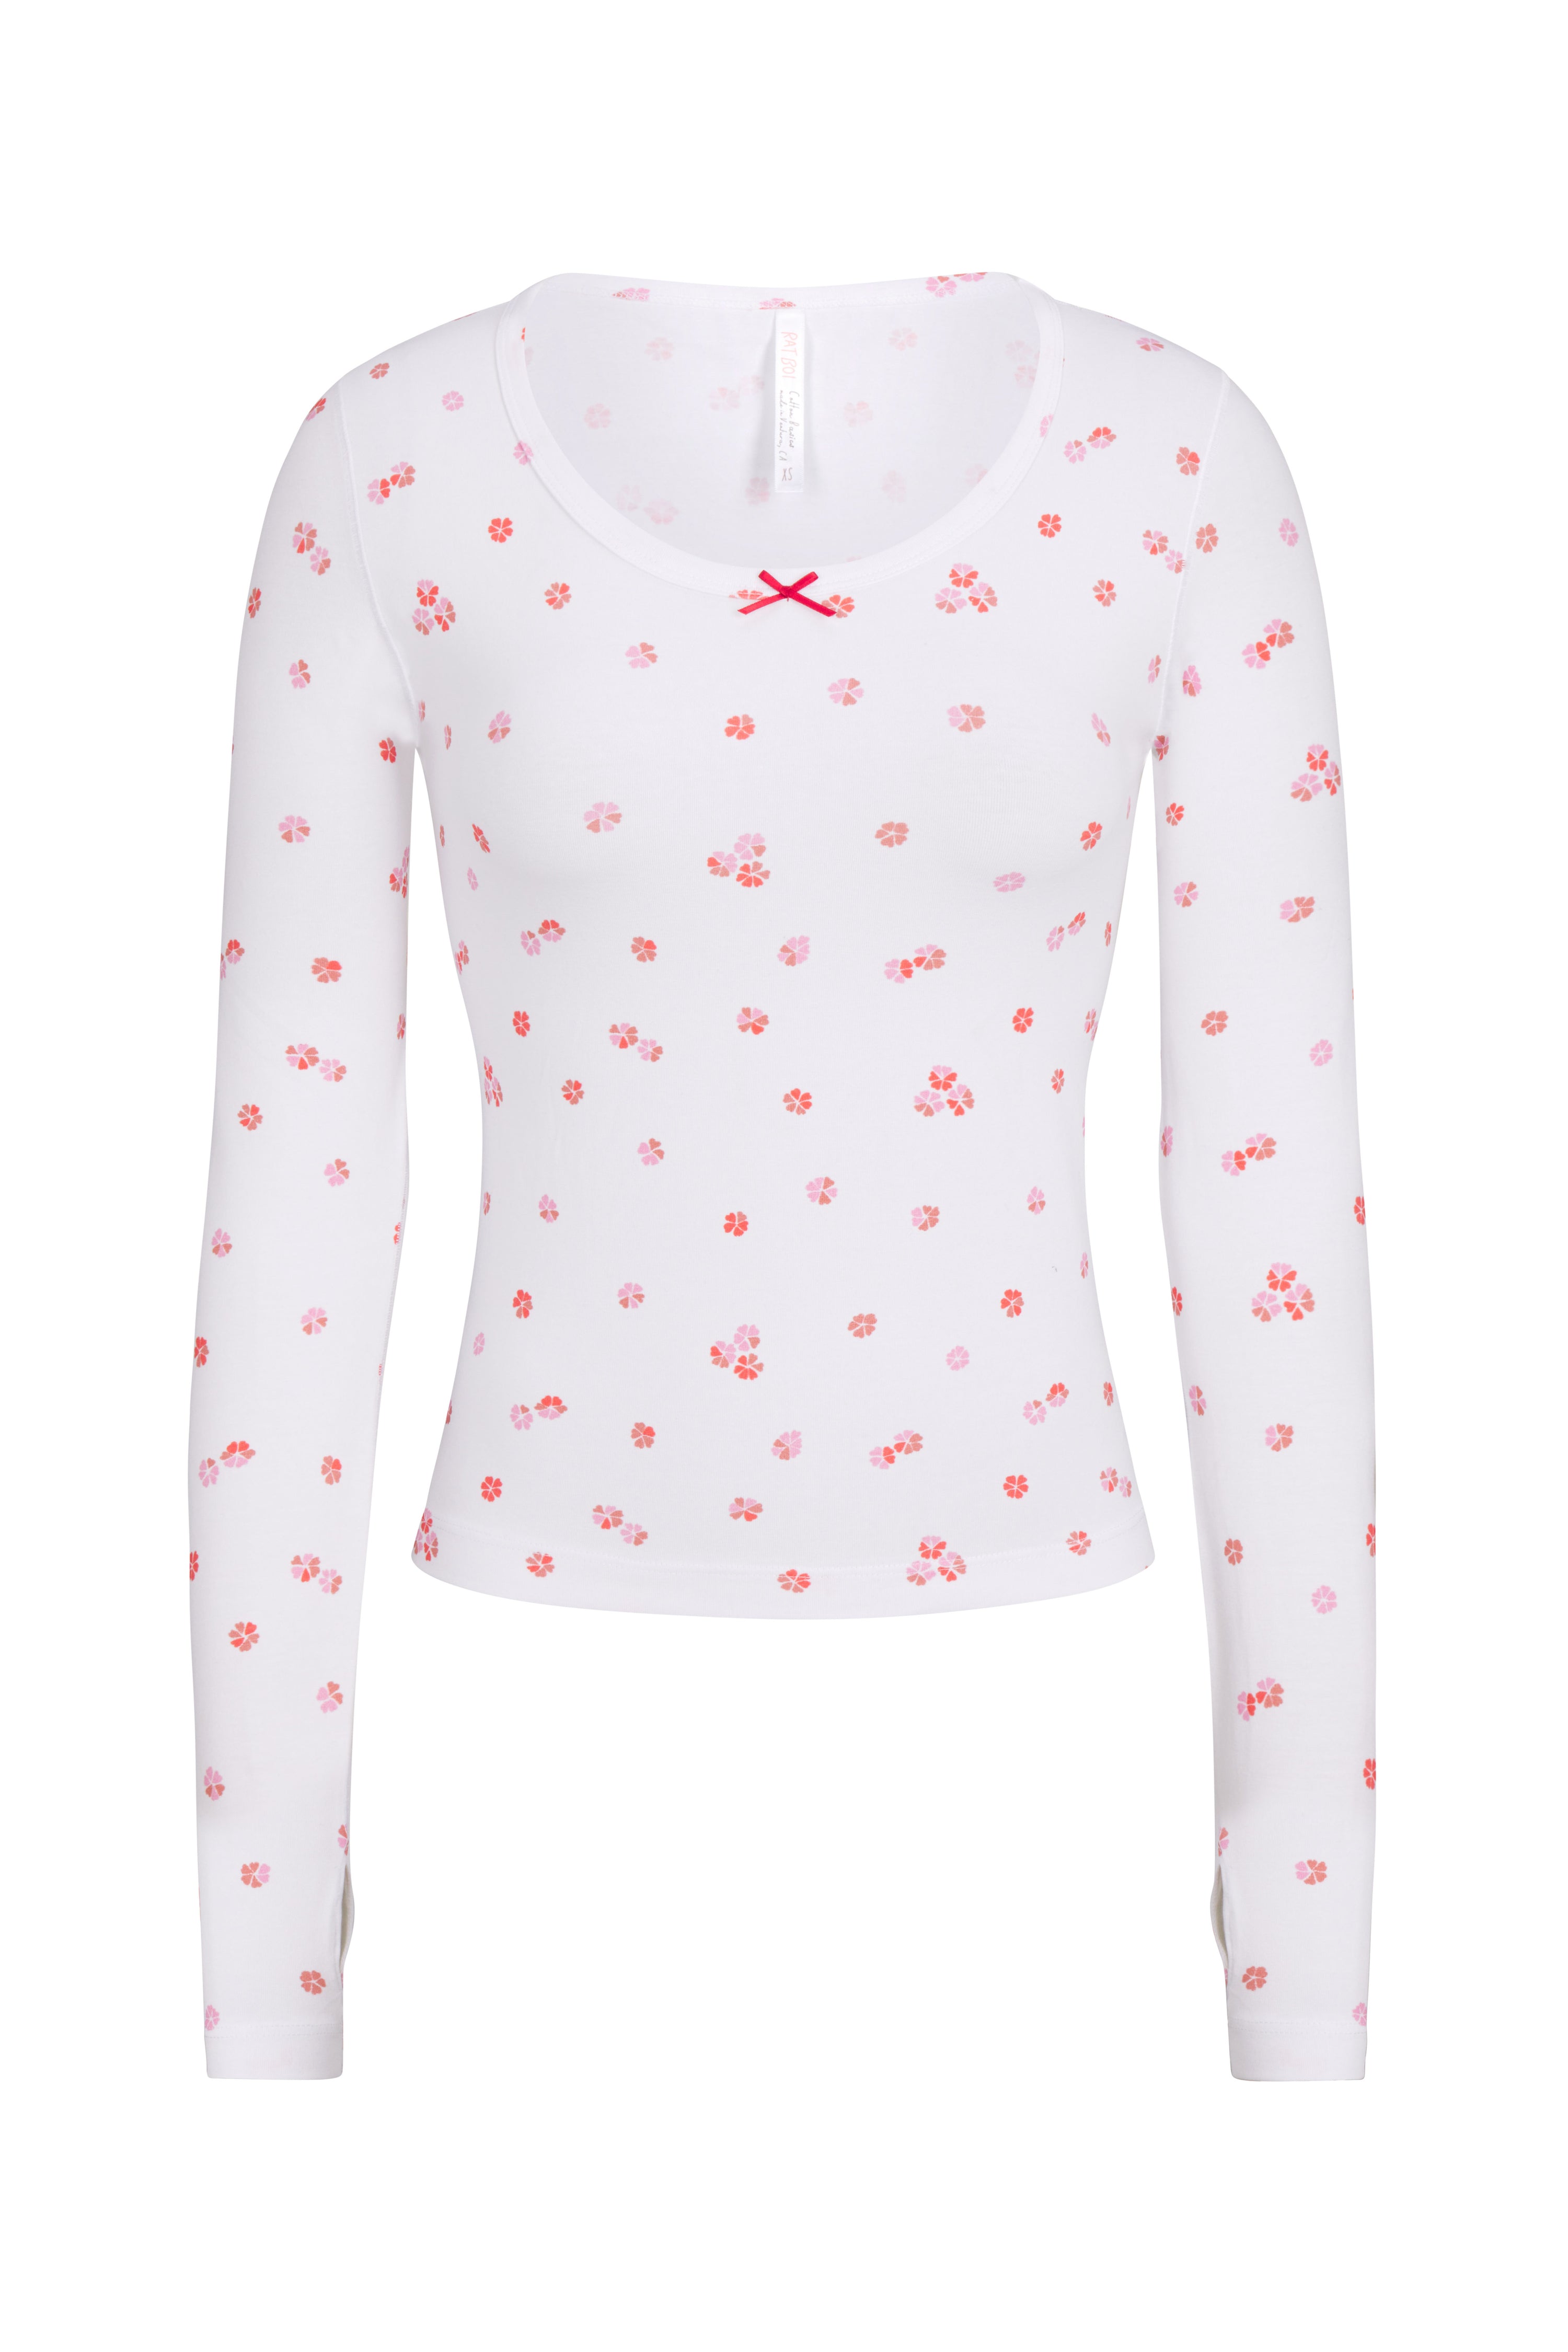 LONG SLEEVE LOUNGE TOP IN CHERRY BLOSSOM – RAT BOI